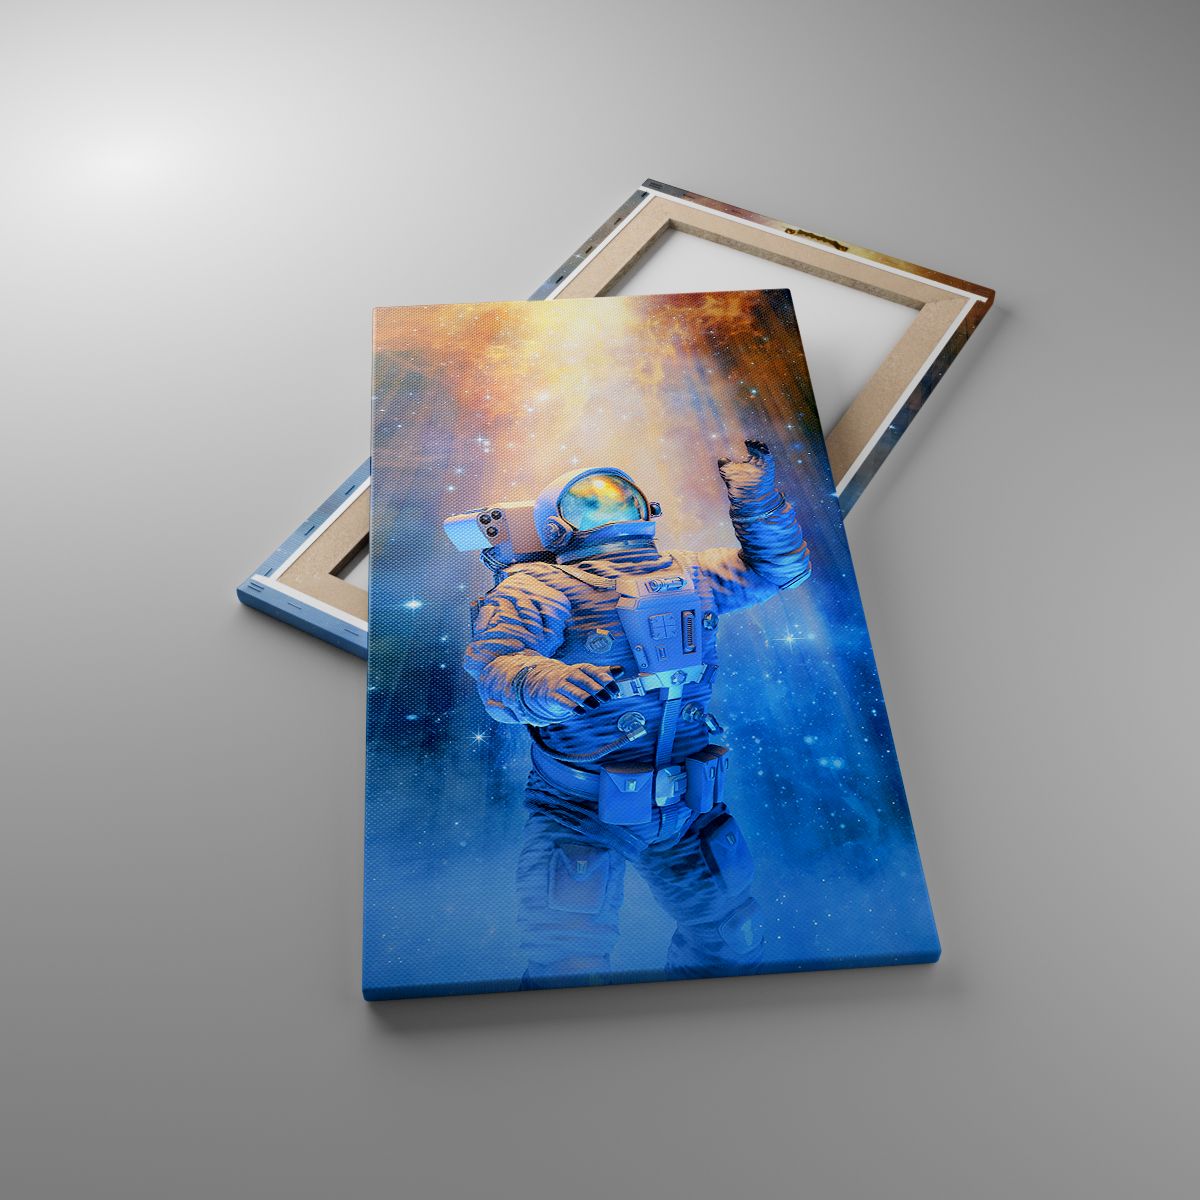 Canvas picture Abstraction, Canvas picture Astronaut, Canvas picture Cosmos, Canvas picture Art, Canvas picture Universe